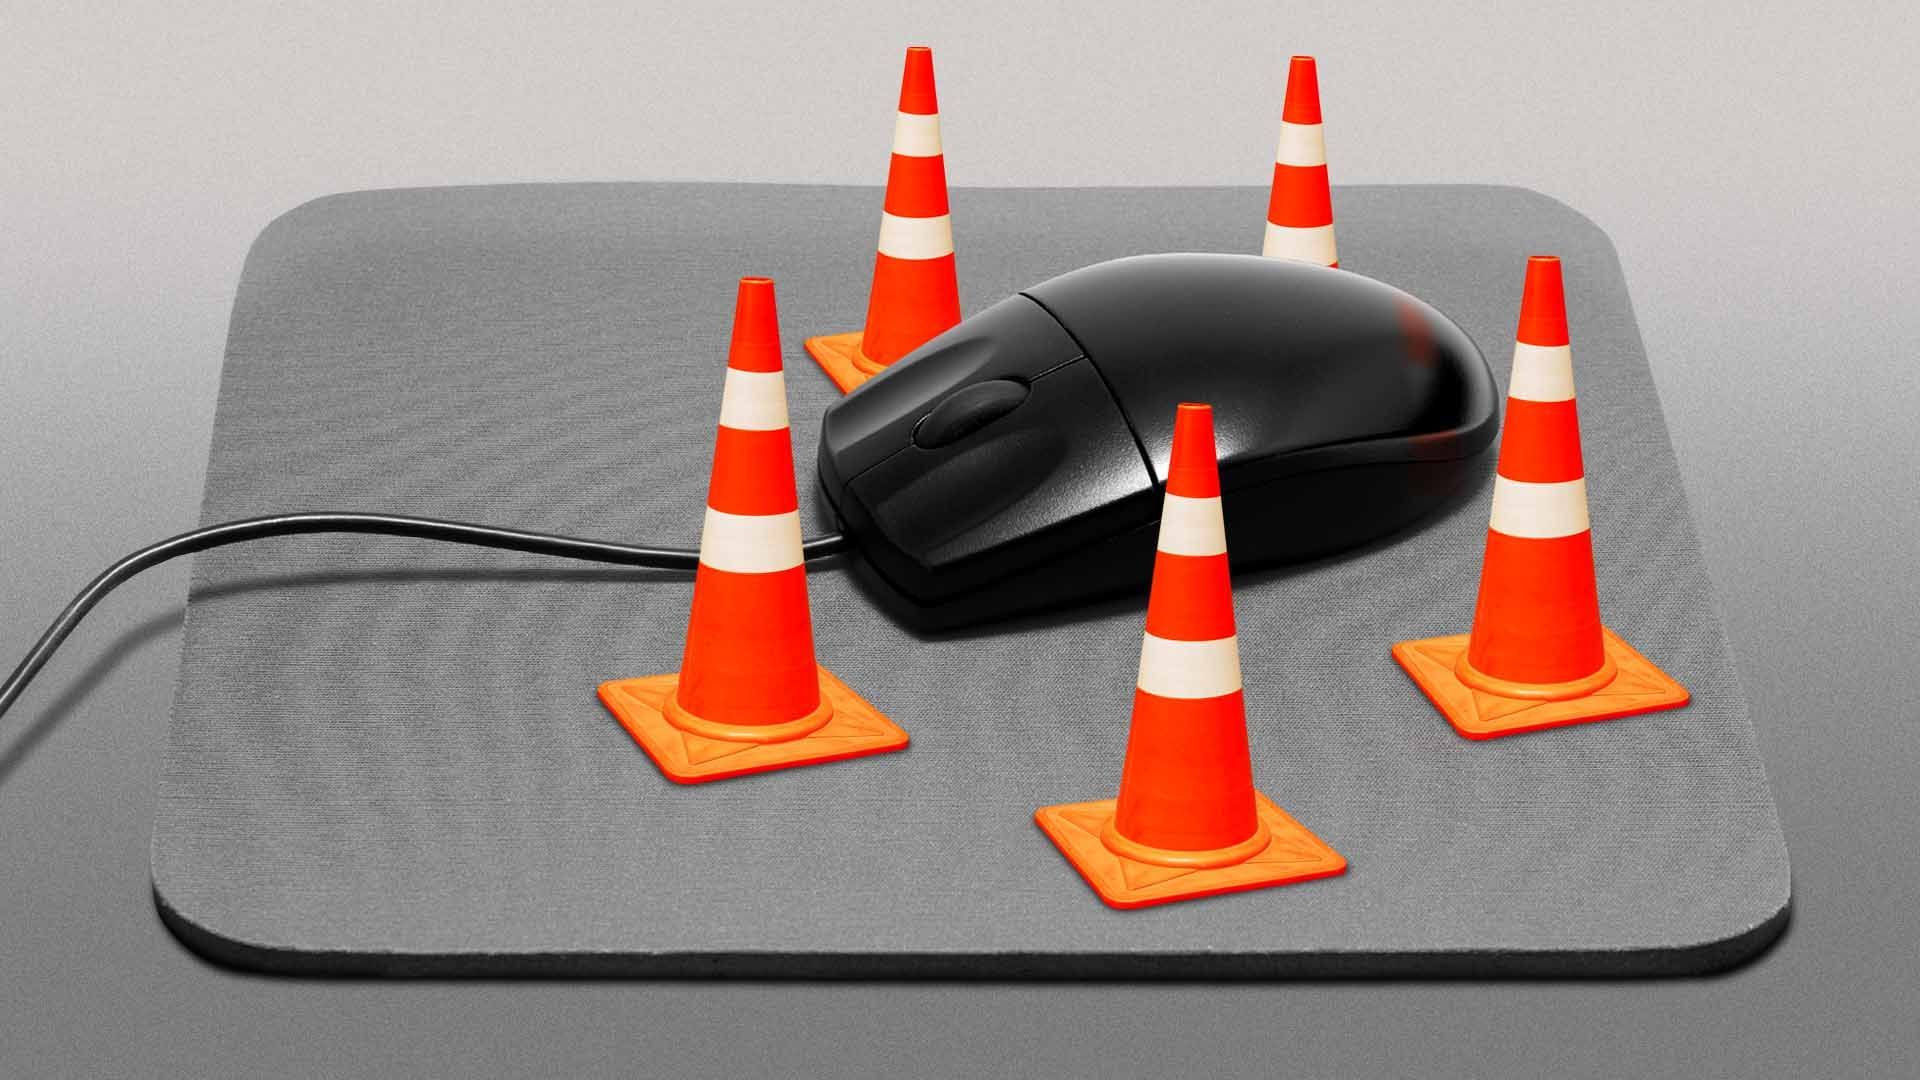 Illustration of a computer mouse surrounded by traffic cones